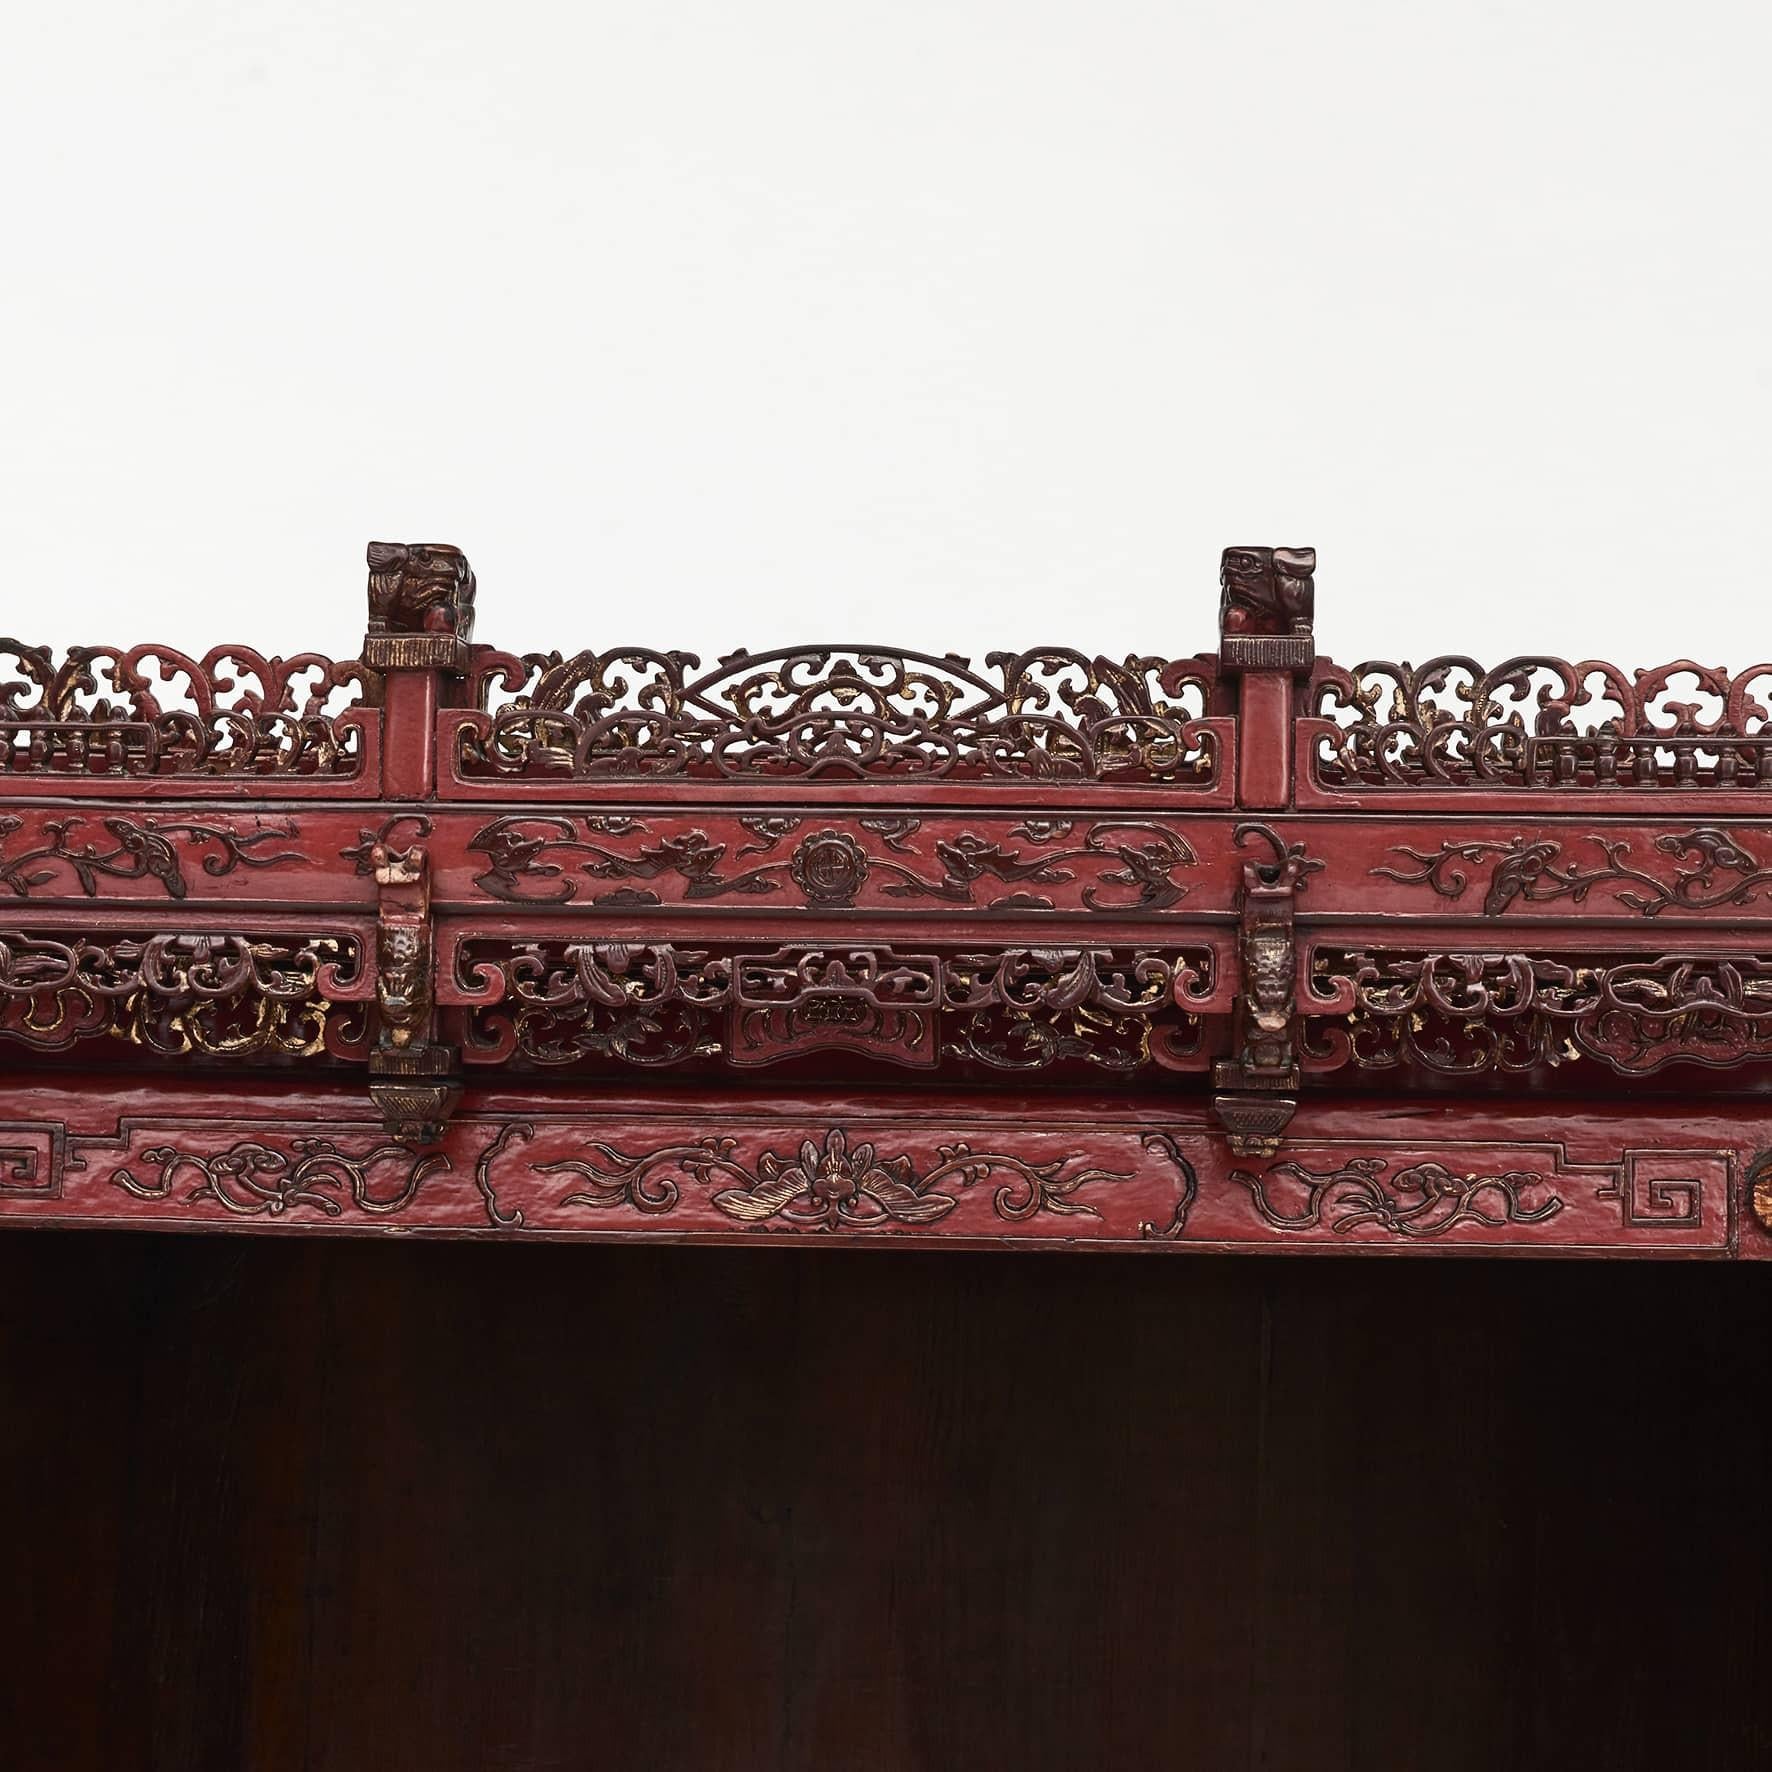 Cypress Red Lacquer Wedding Cabinet Fujian Province c 1880.